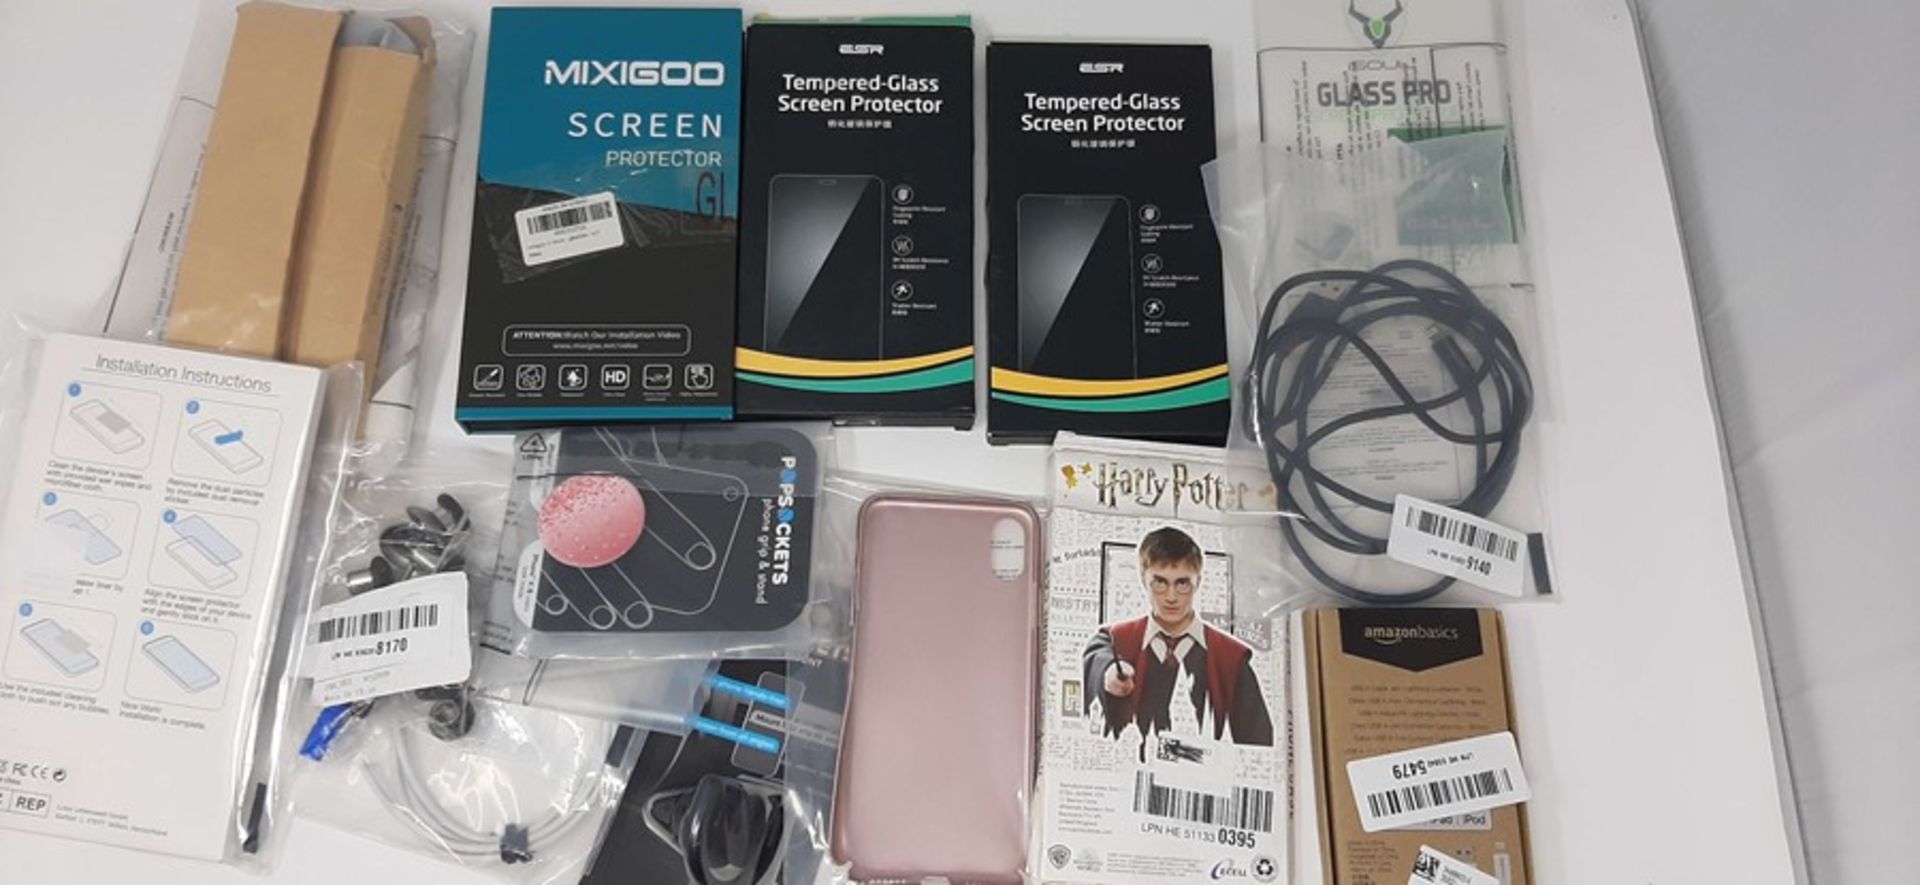 COMBINED RRP £98.00 LOT TO CONTAIN 14 ASSORTED Tech Products: INIU, AmazonBasics, PopSockets, K